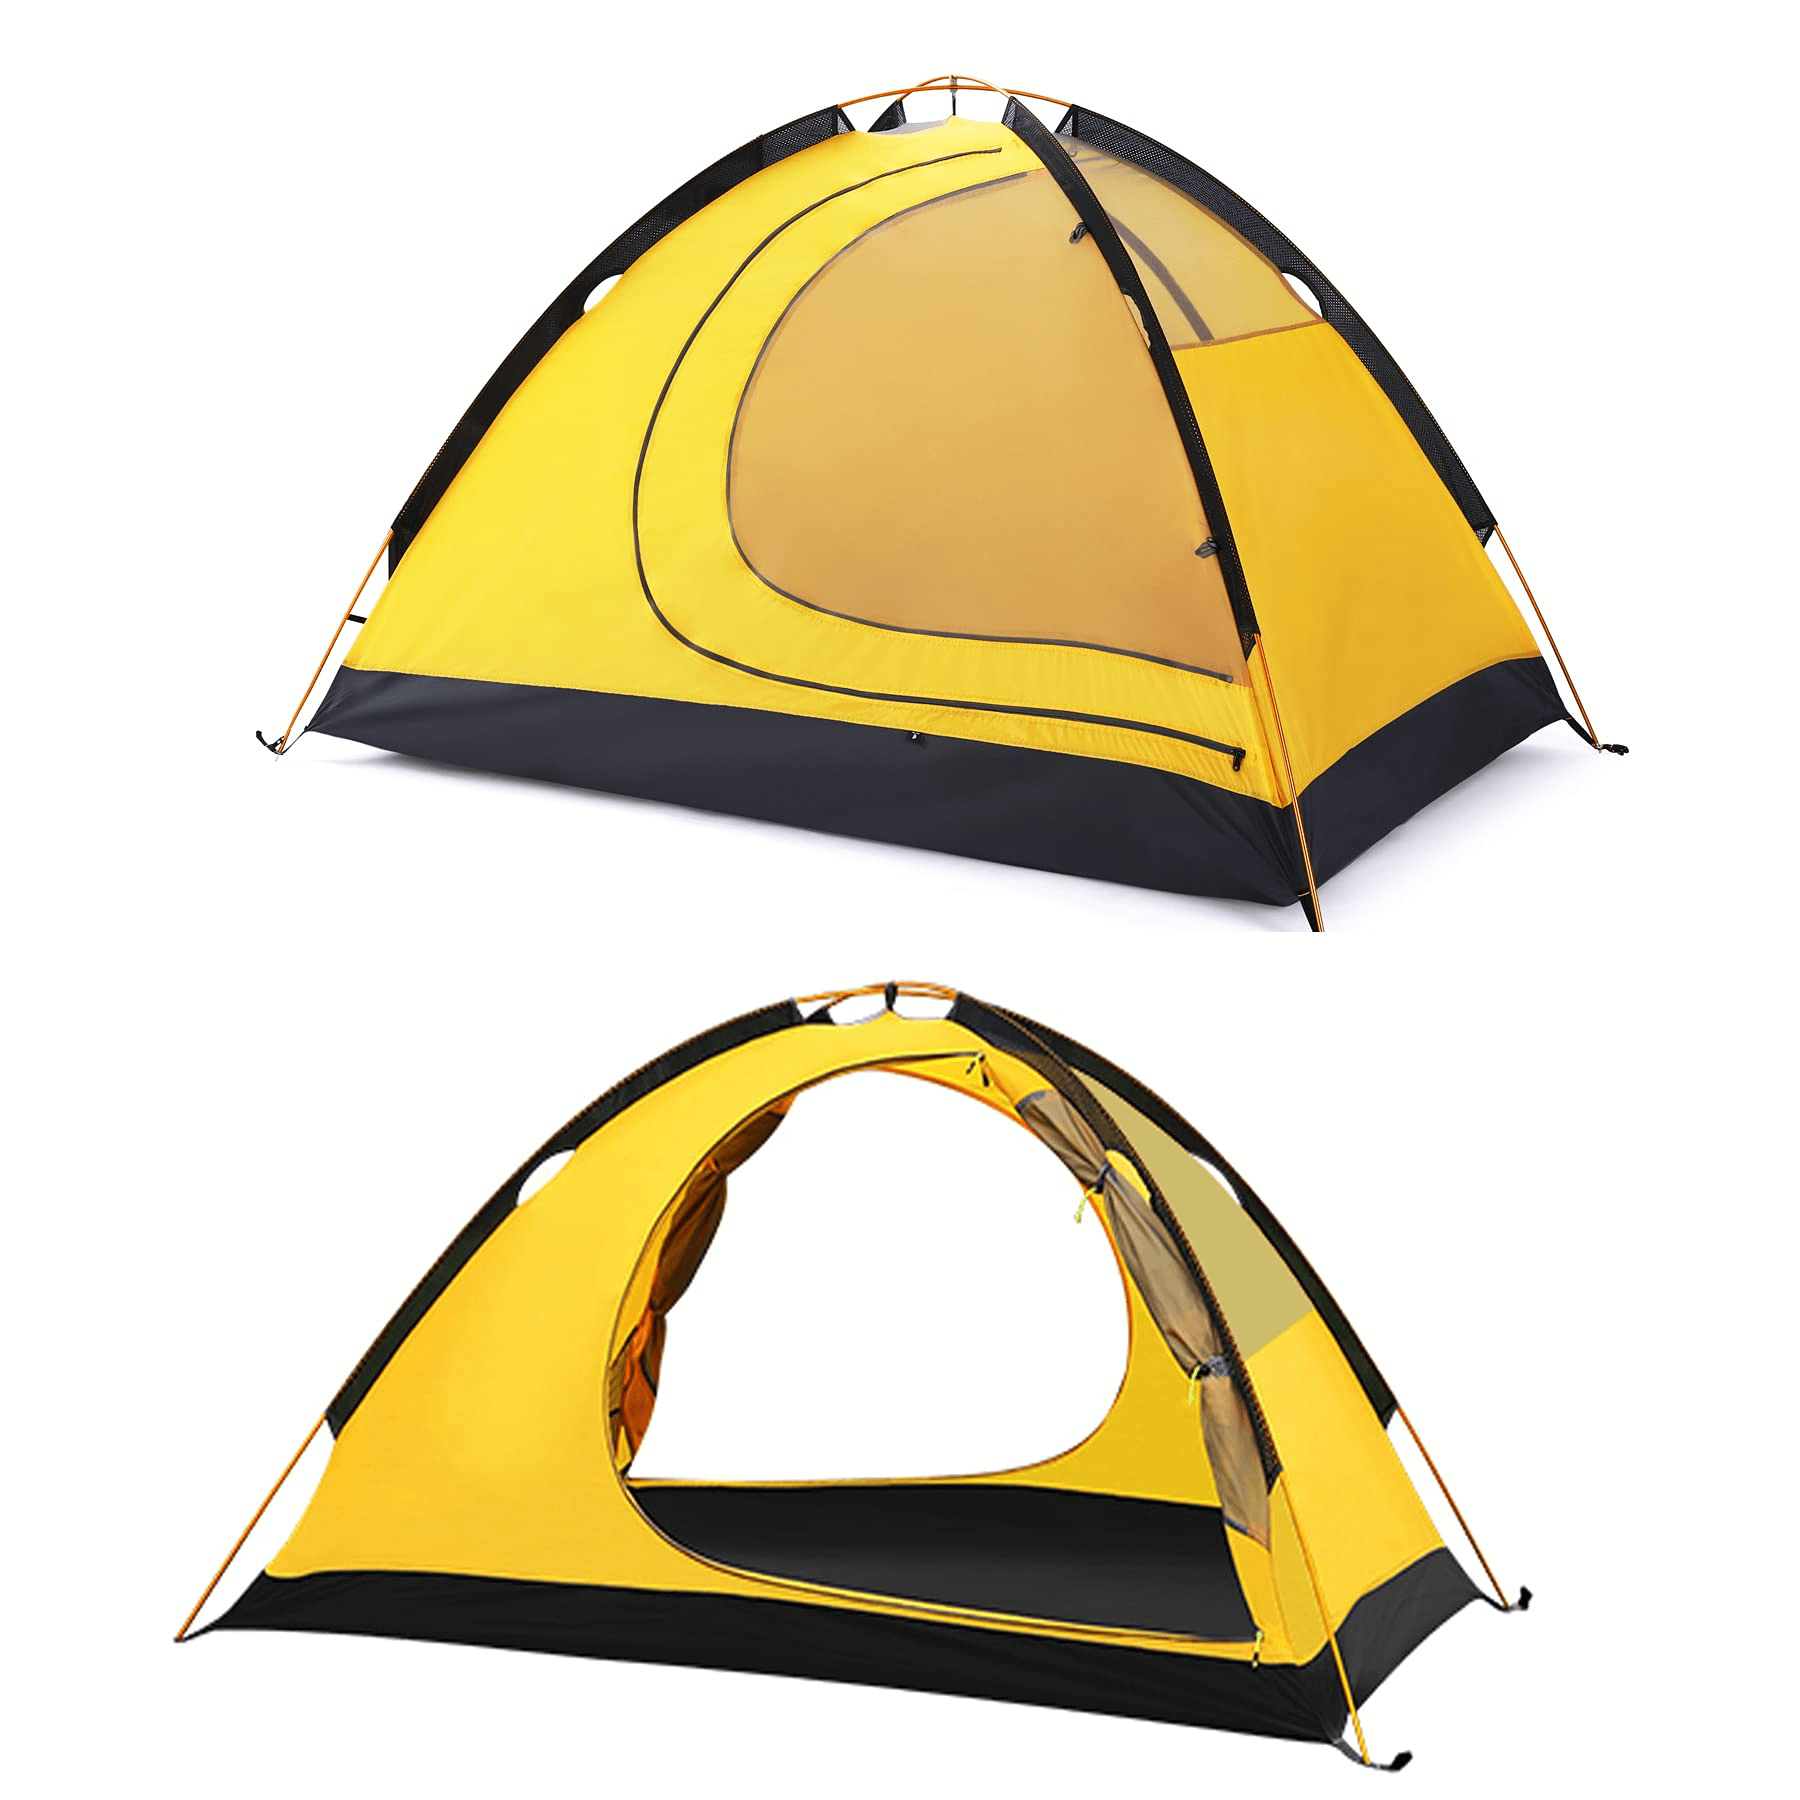 Backpacking Tent 1-Person W/ 2 Vents Outdoor Camping Travel